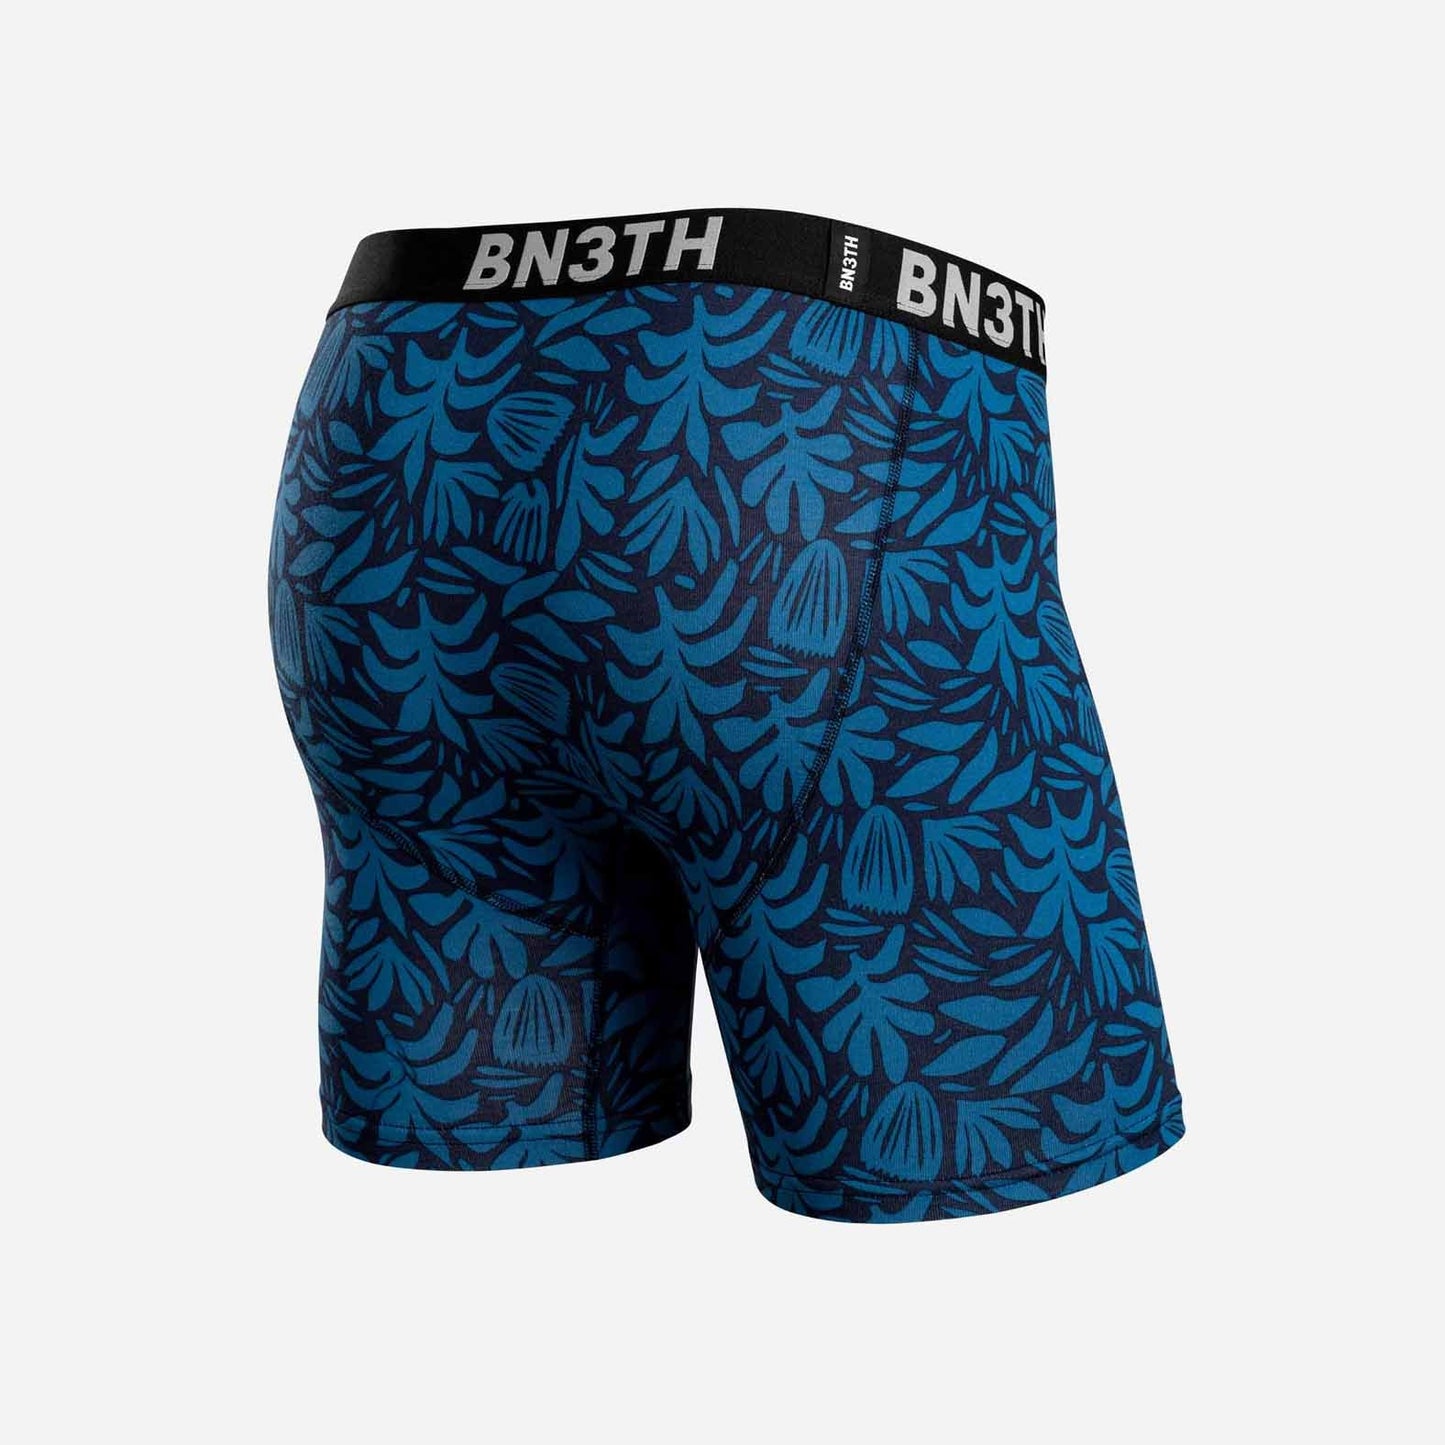 OUTSET BOXER BRIEF: ABSTRACT TROPICAL NAVY